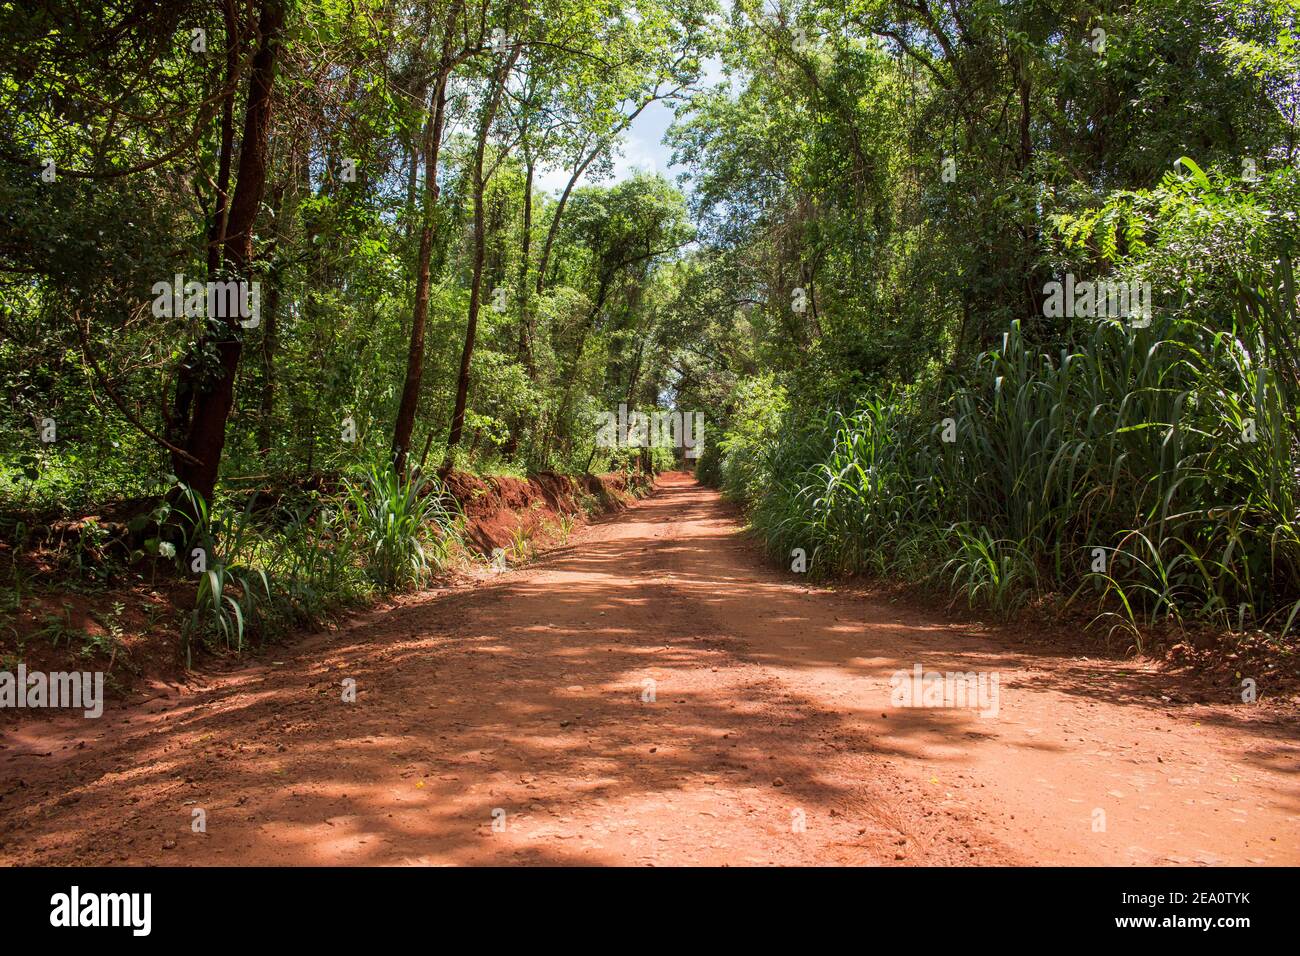 Landscape of beautiful dirt road passing through a dense forest Stock Photo